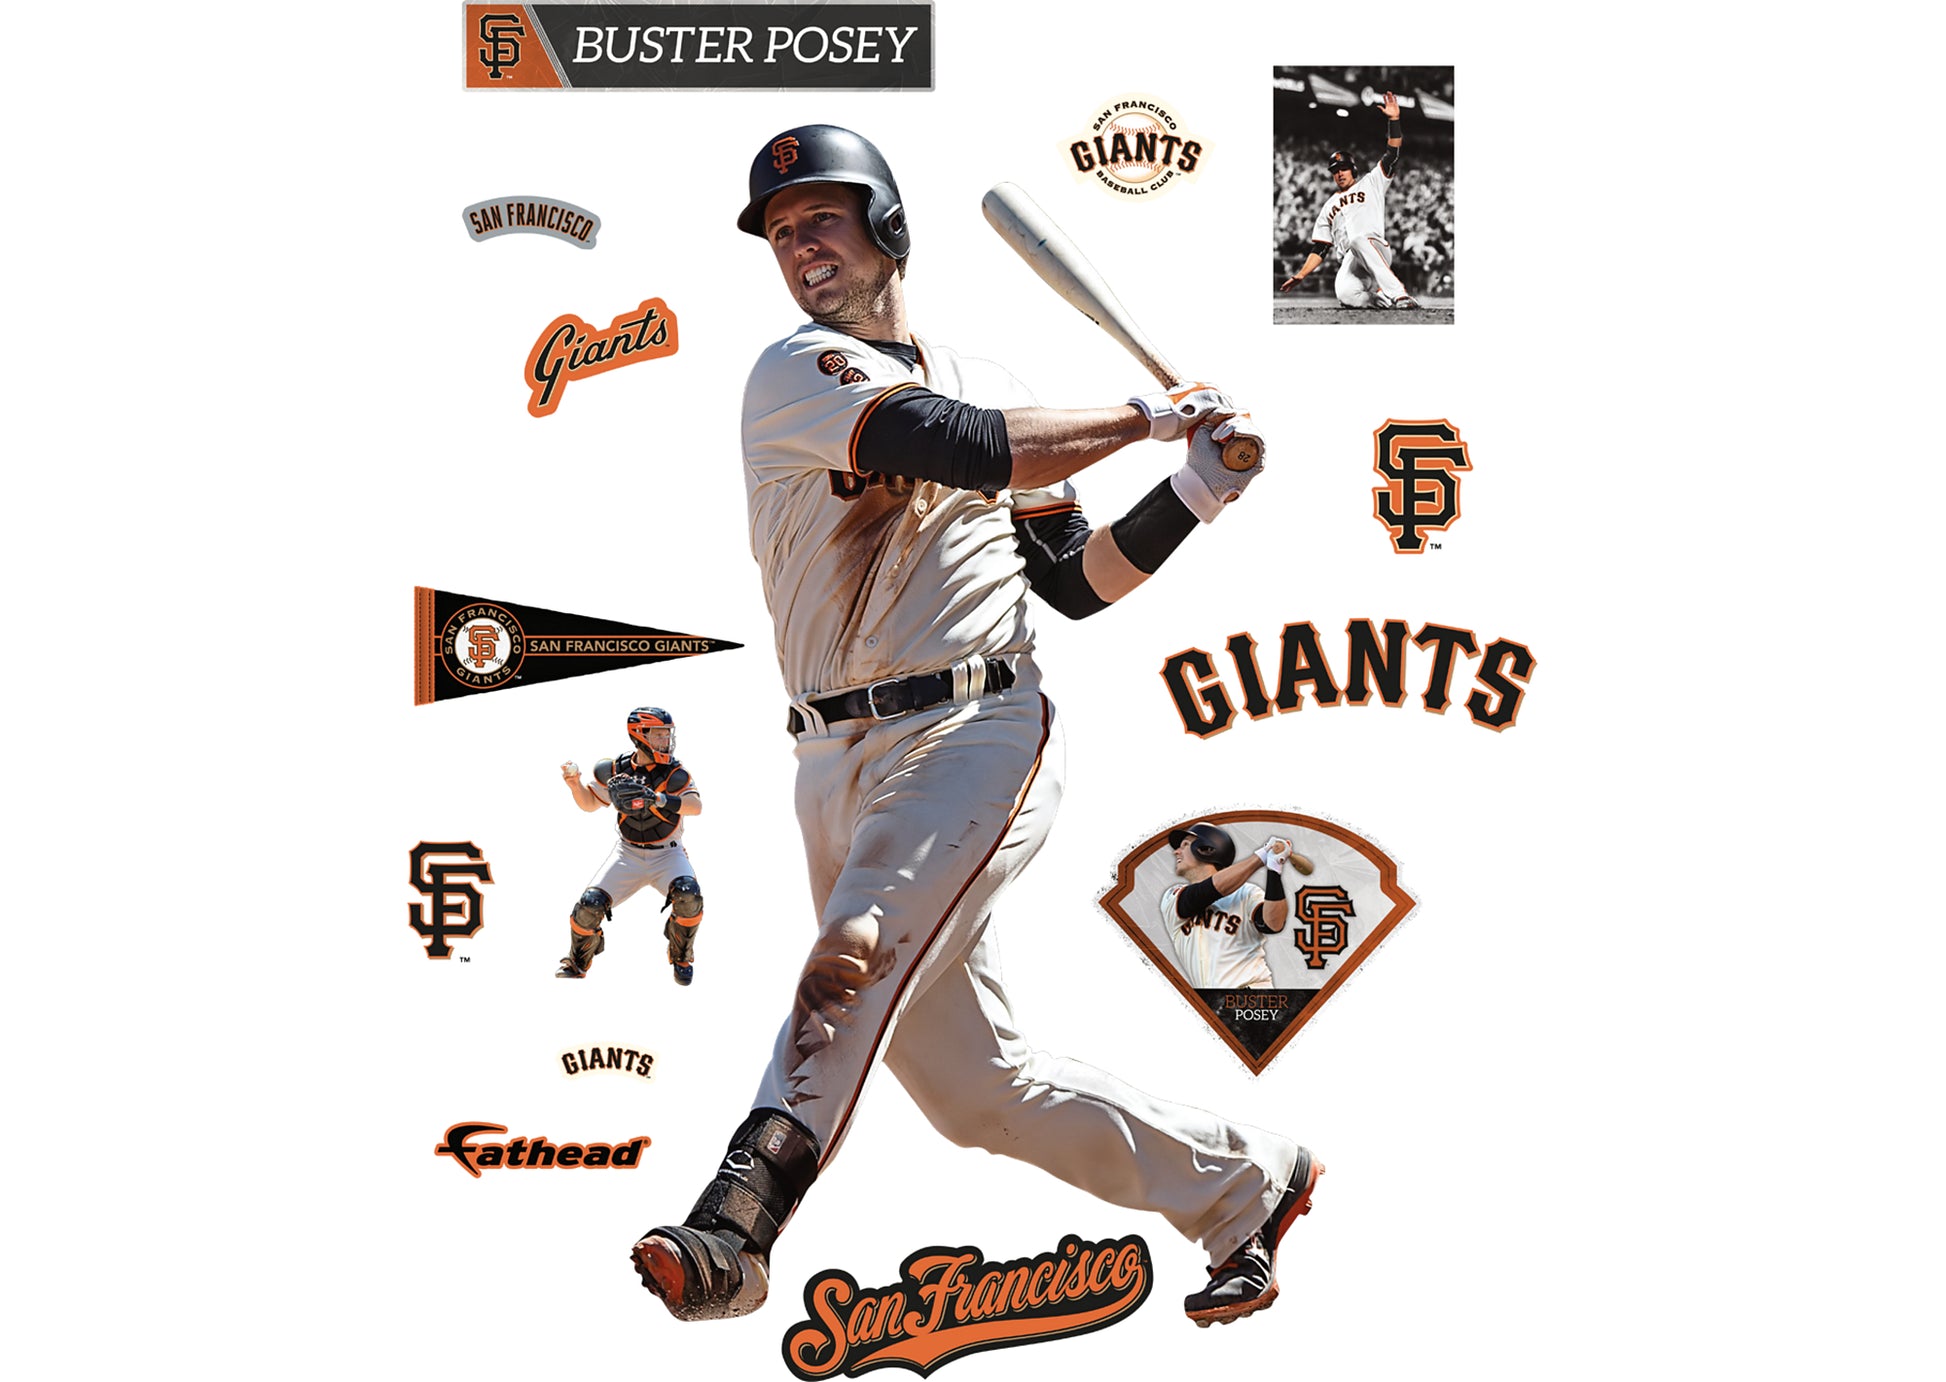 Fathead Buster Posey San Francisco Giants Life Size Removable Wall Decal